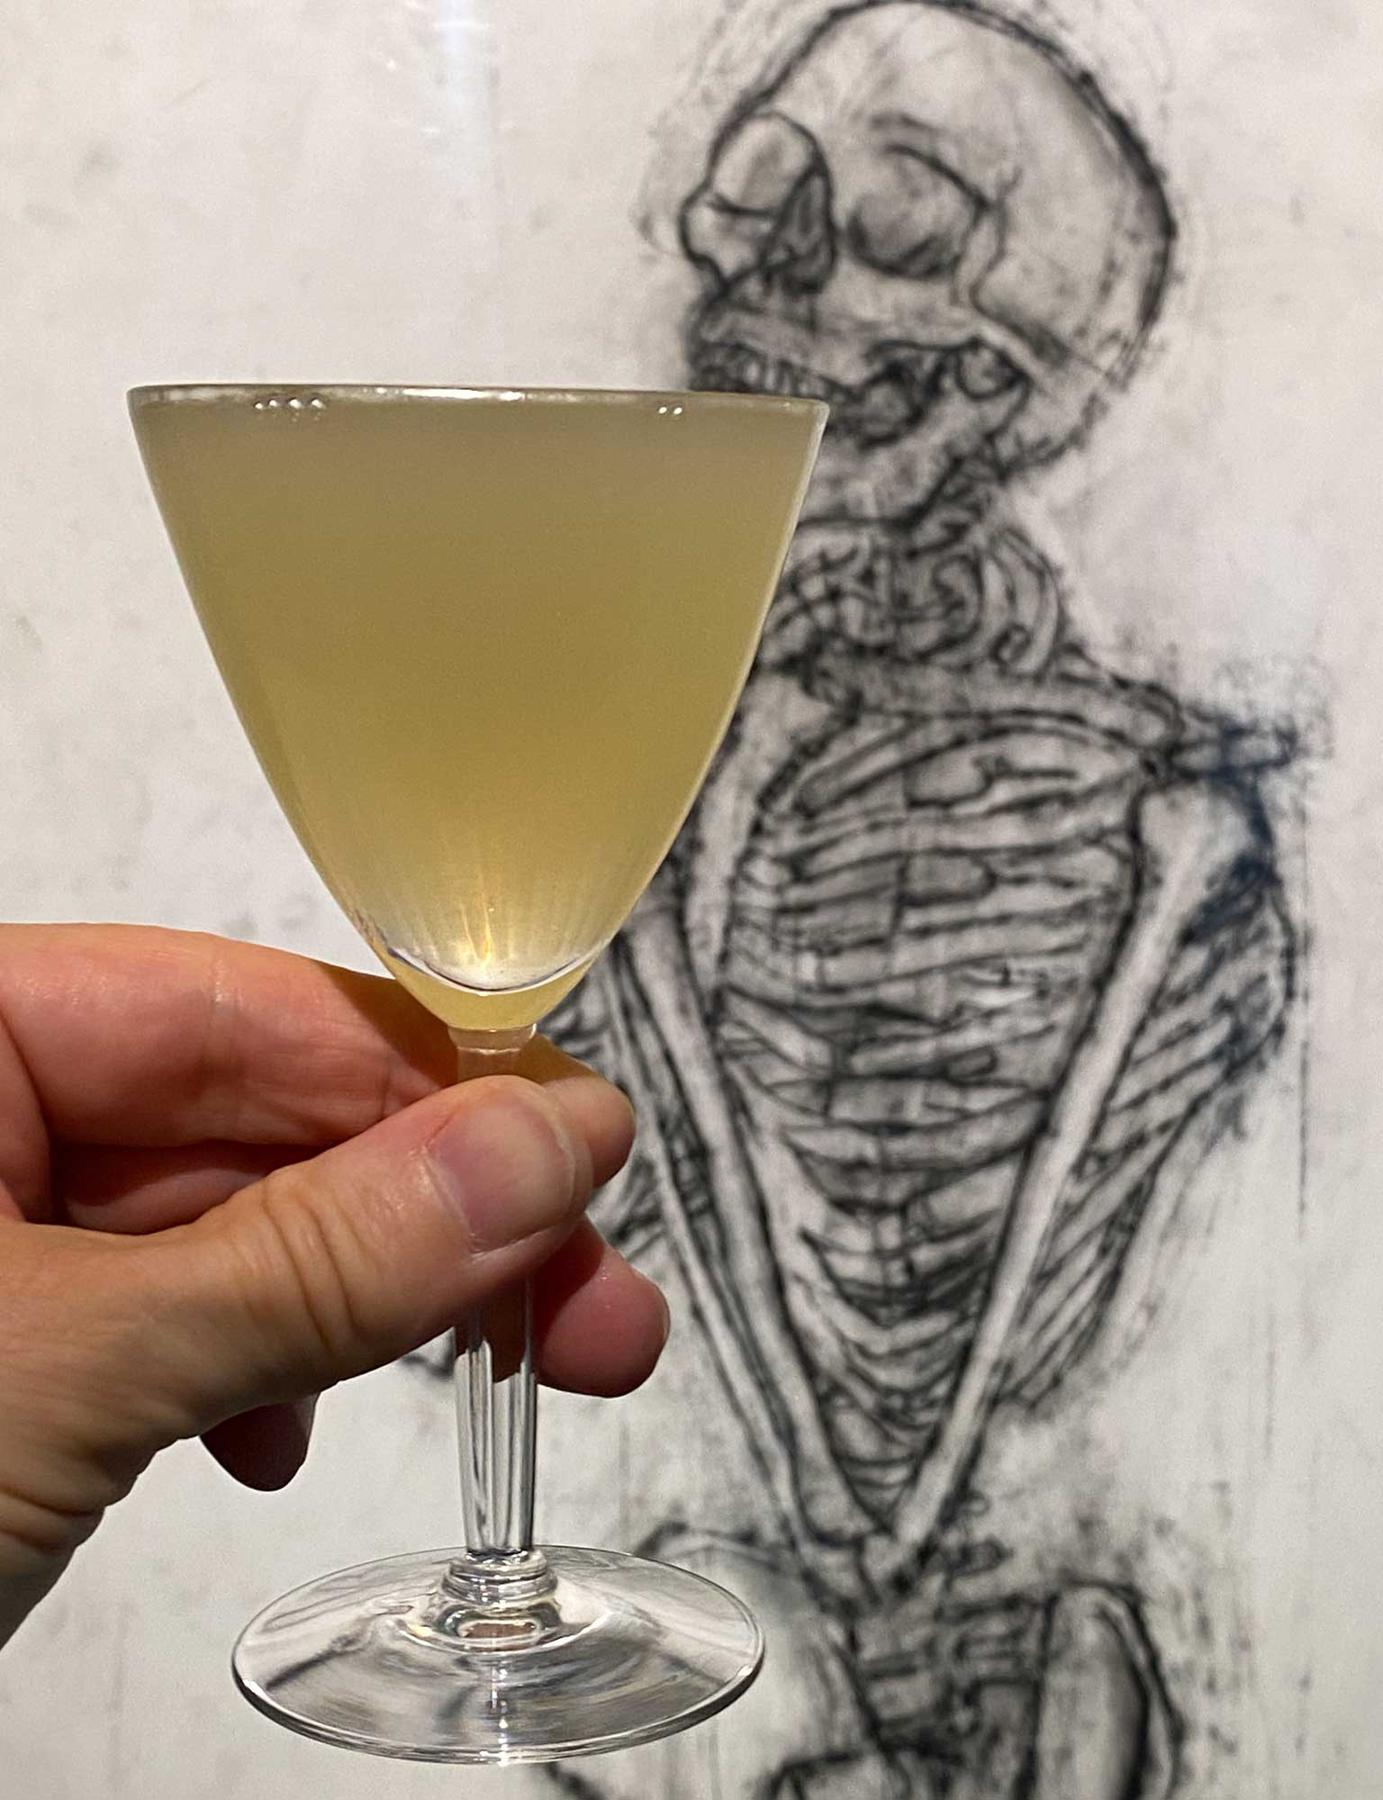 An example of the Corpse Reviver #2, the mixed drink (drink) featuring Hayman’s London Dry Gin, Cocchi Americano Bianco, orange-flavored liqueur, and lemon juice; photo by Martin Doudoroff